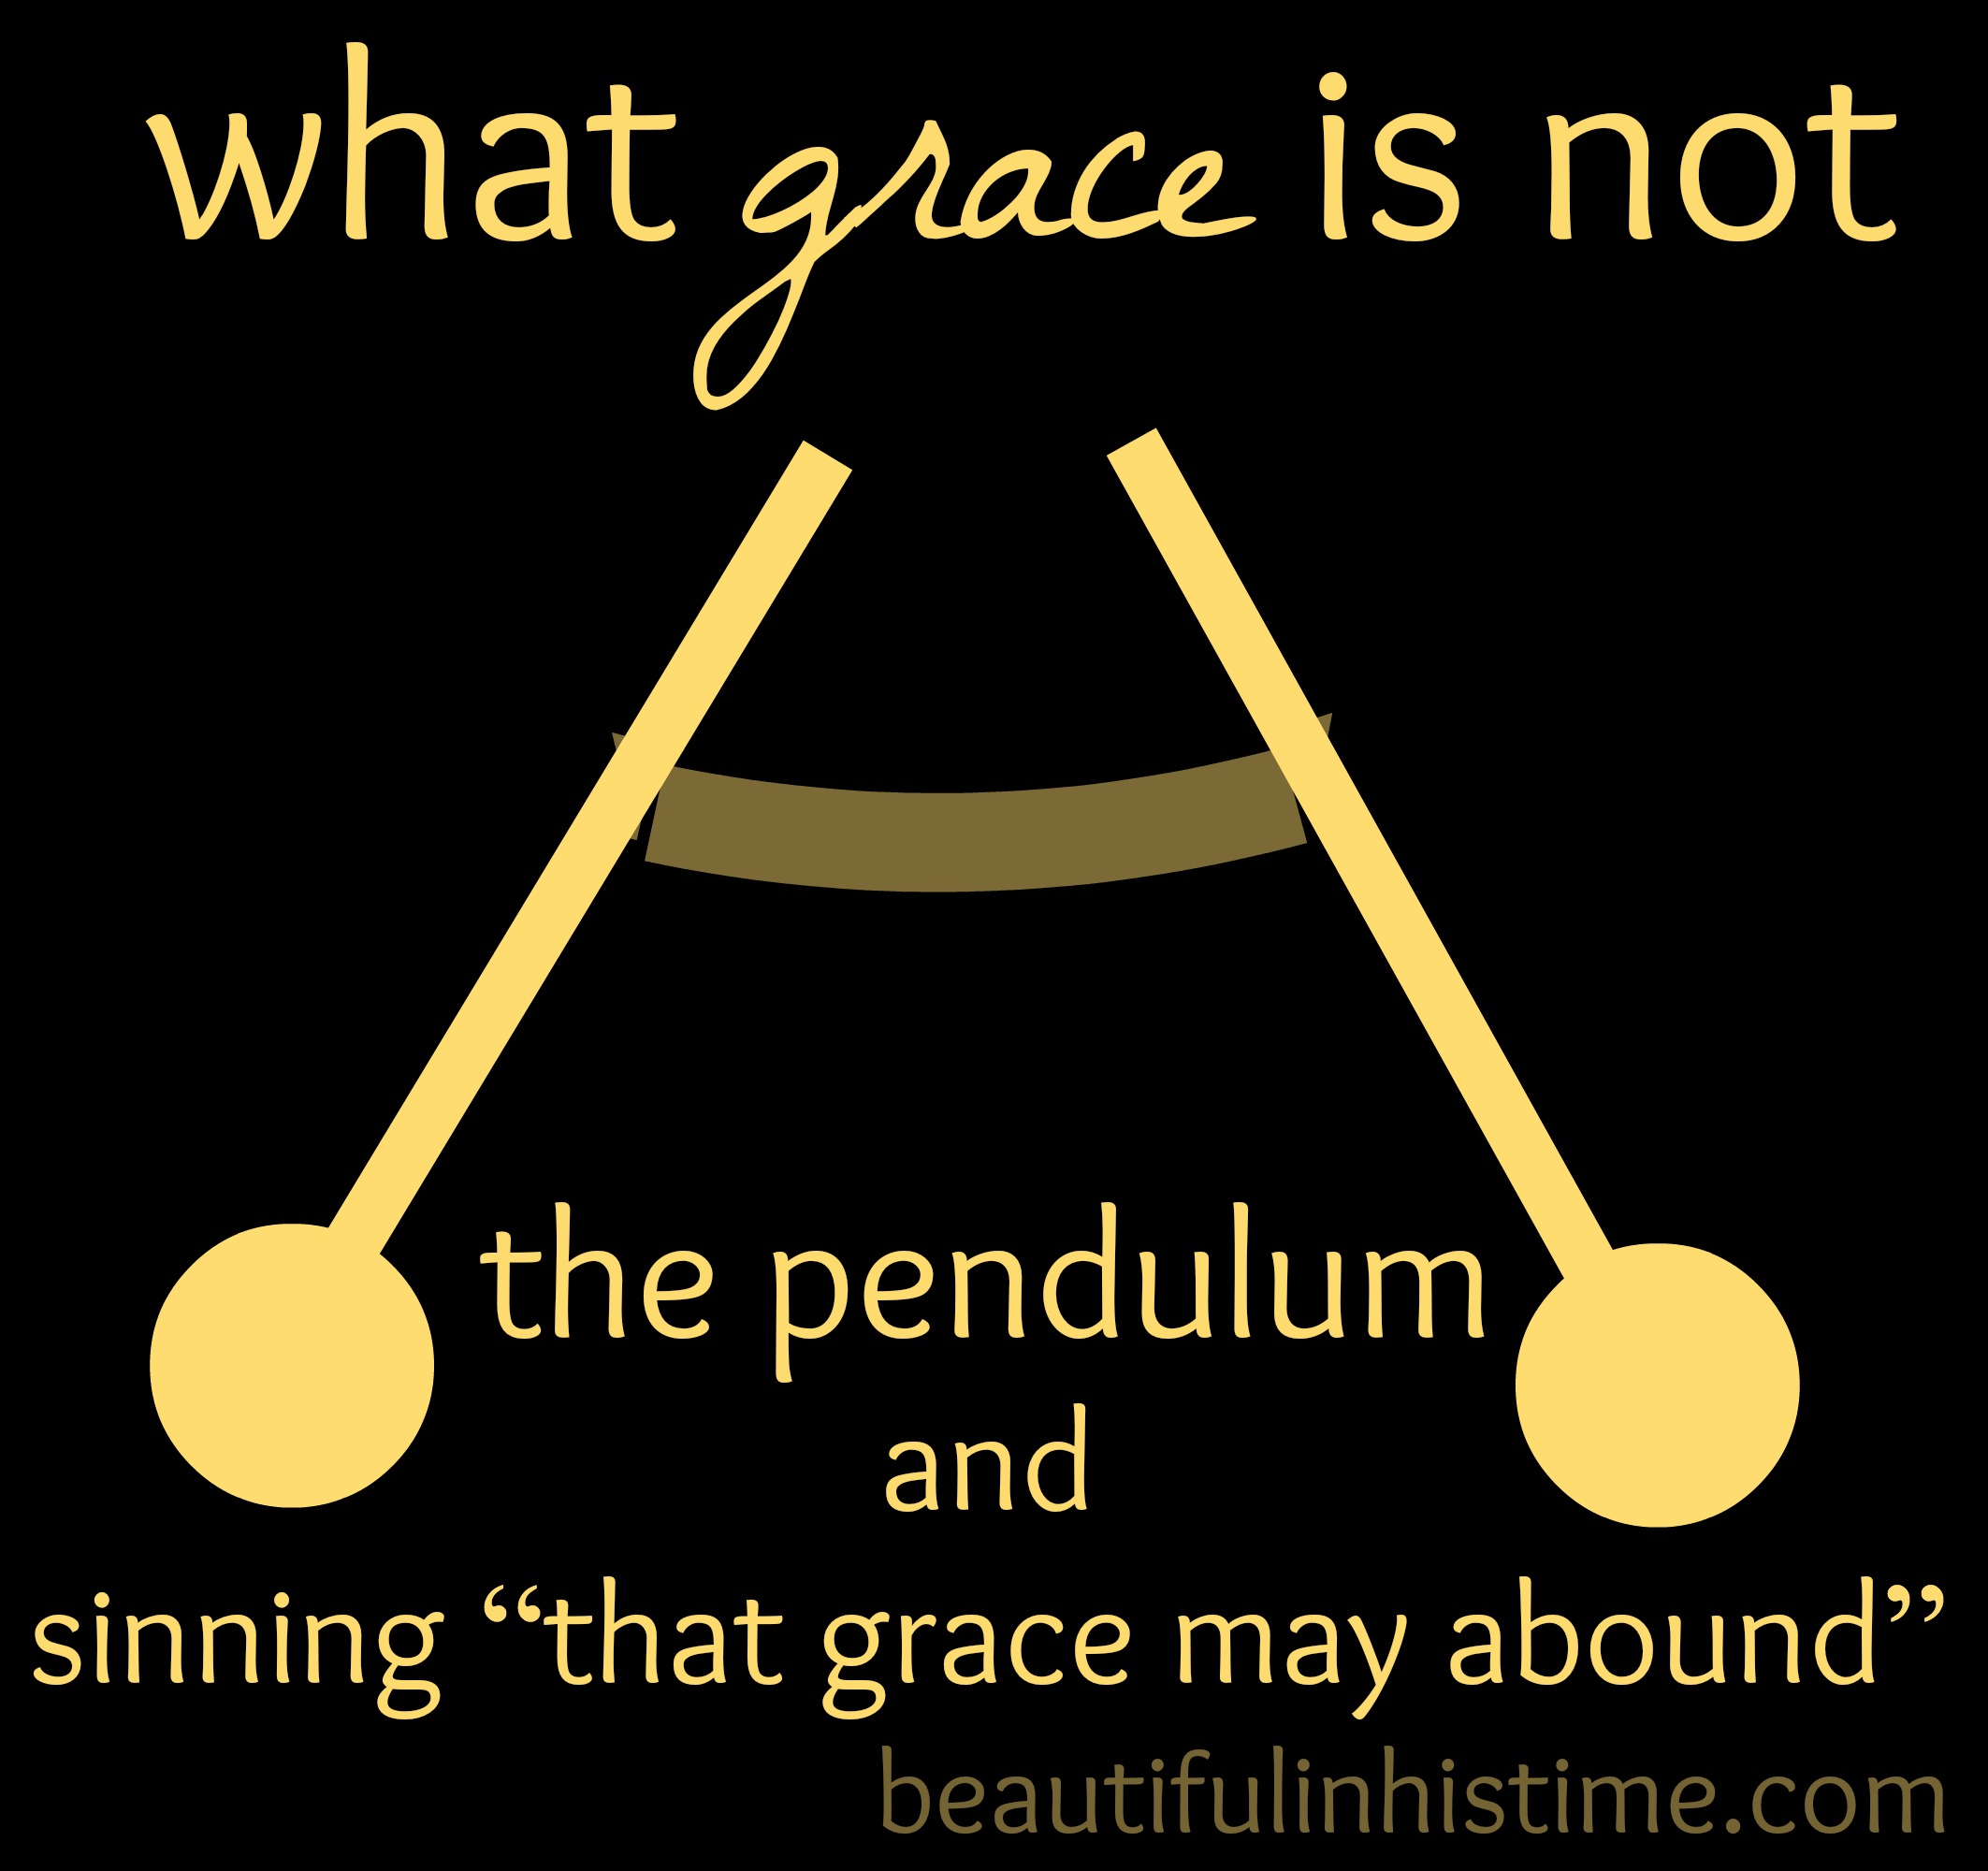 what grace is not: the pendulum and sinning “that grace may abound” {the wilderness between #legalism and #grace part 29 @beautifulinhistime.com}